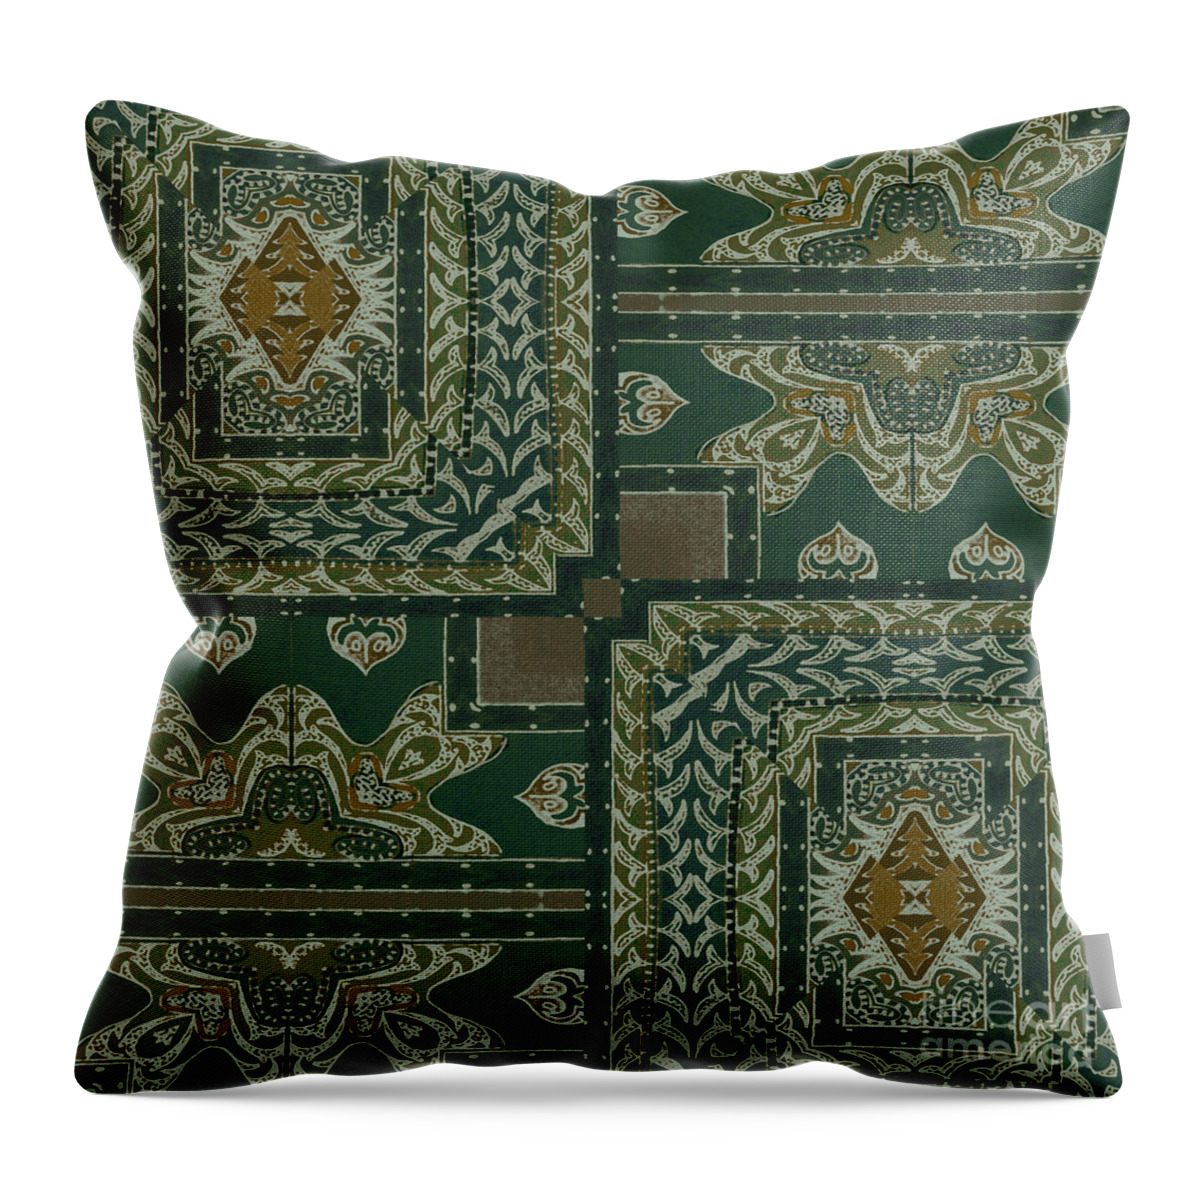 Pattern Throw Pillow featuring the painting Verdant by Mindy Sommers